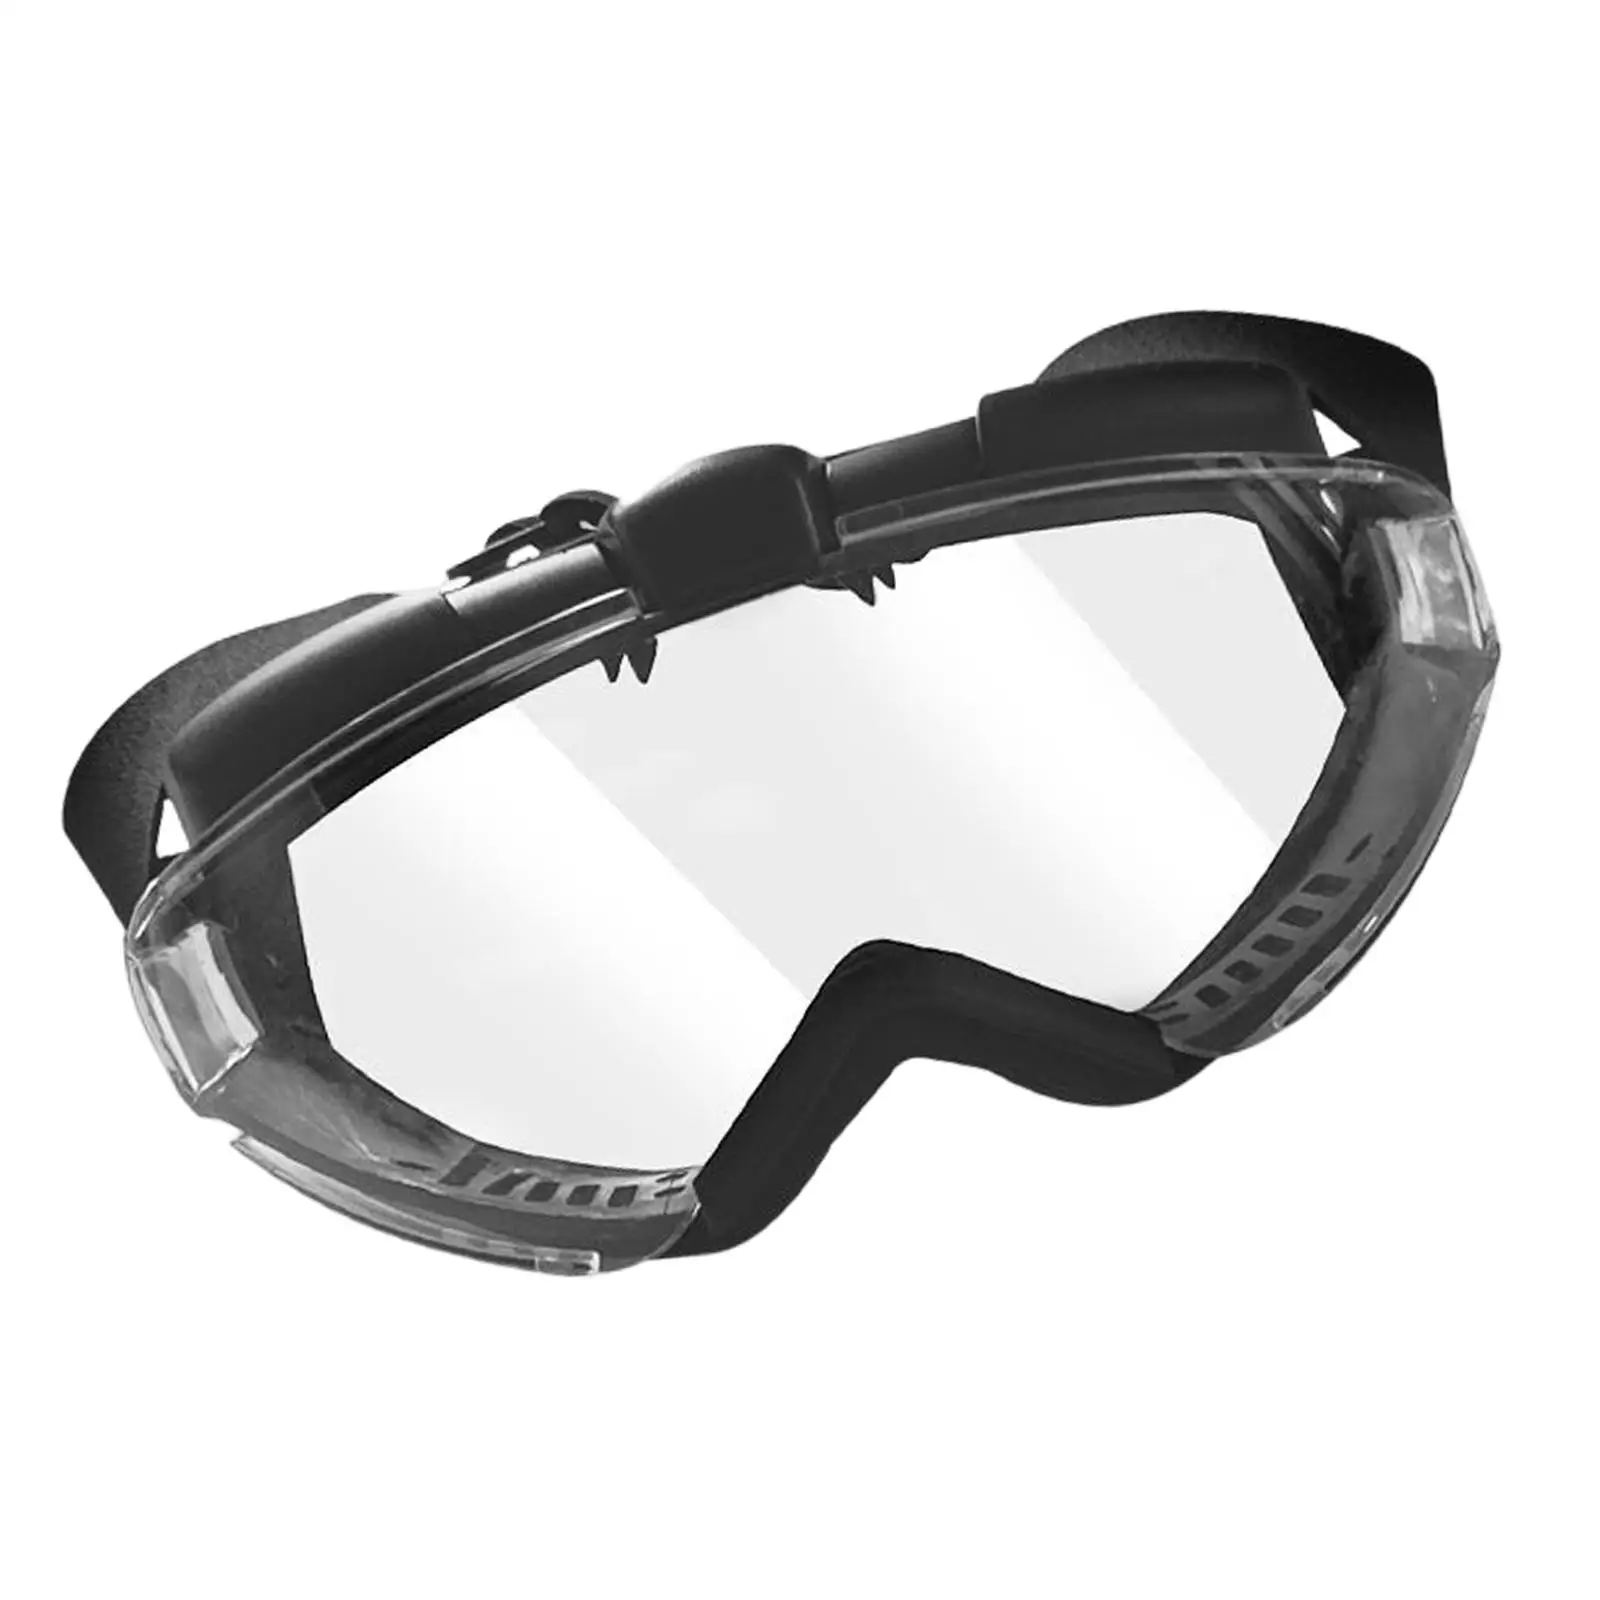 Outdoor Glasses Windproof with Adjustable Strap Eye Protection Goggles Unisex